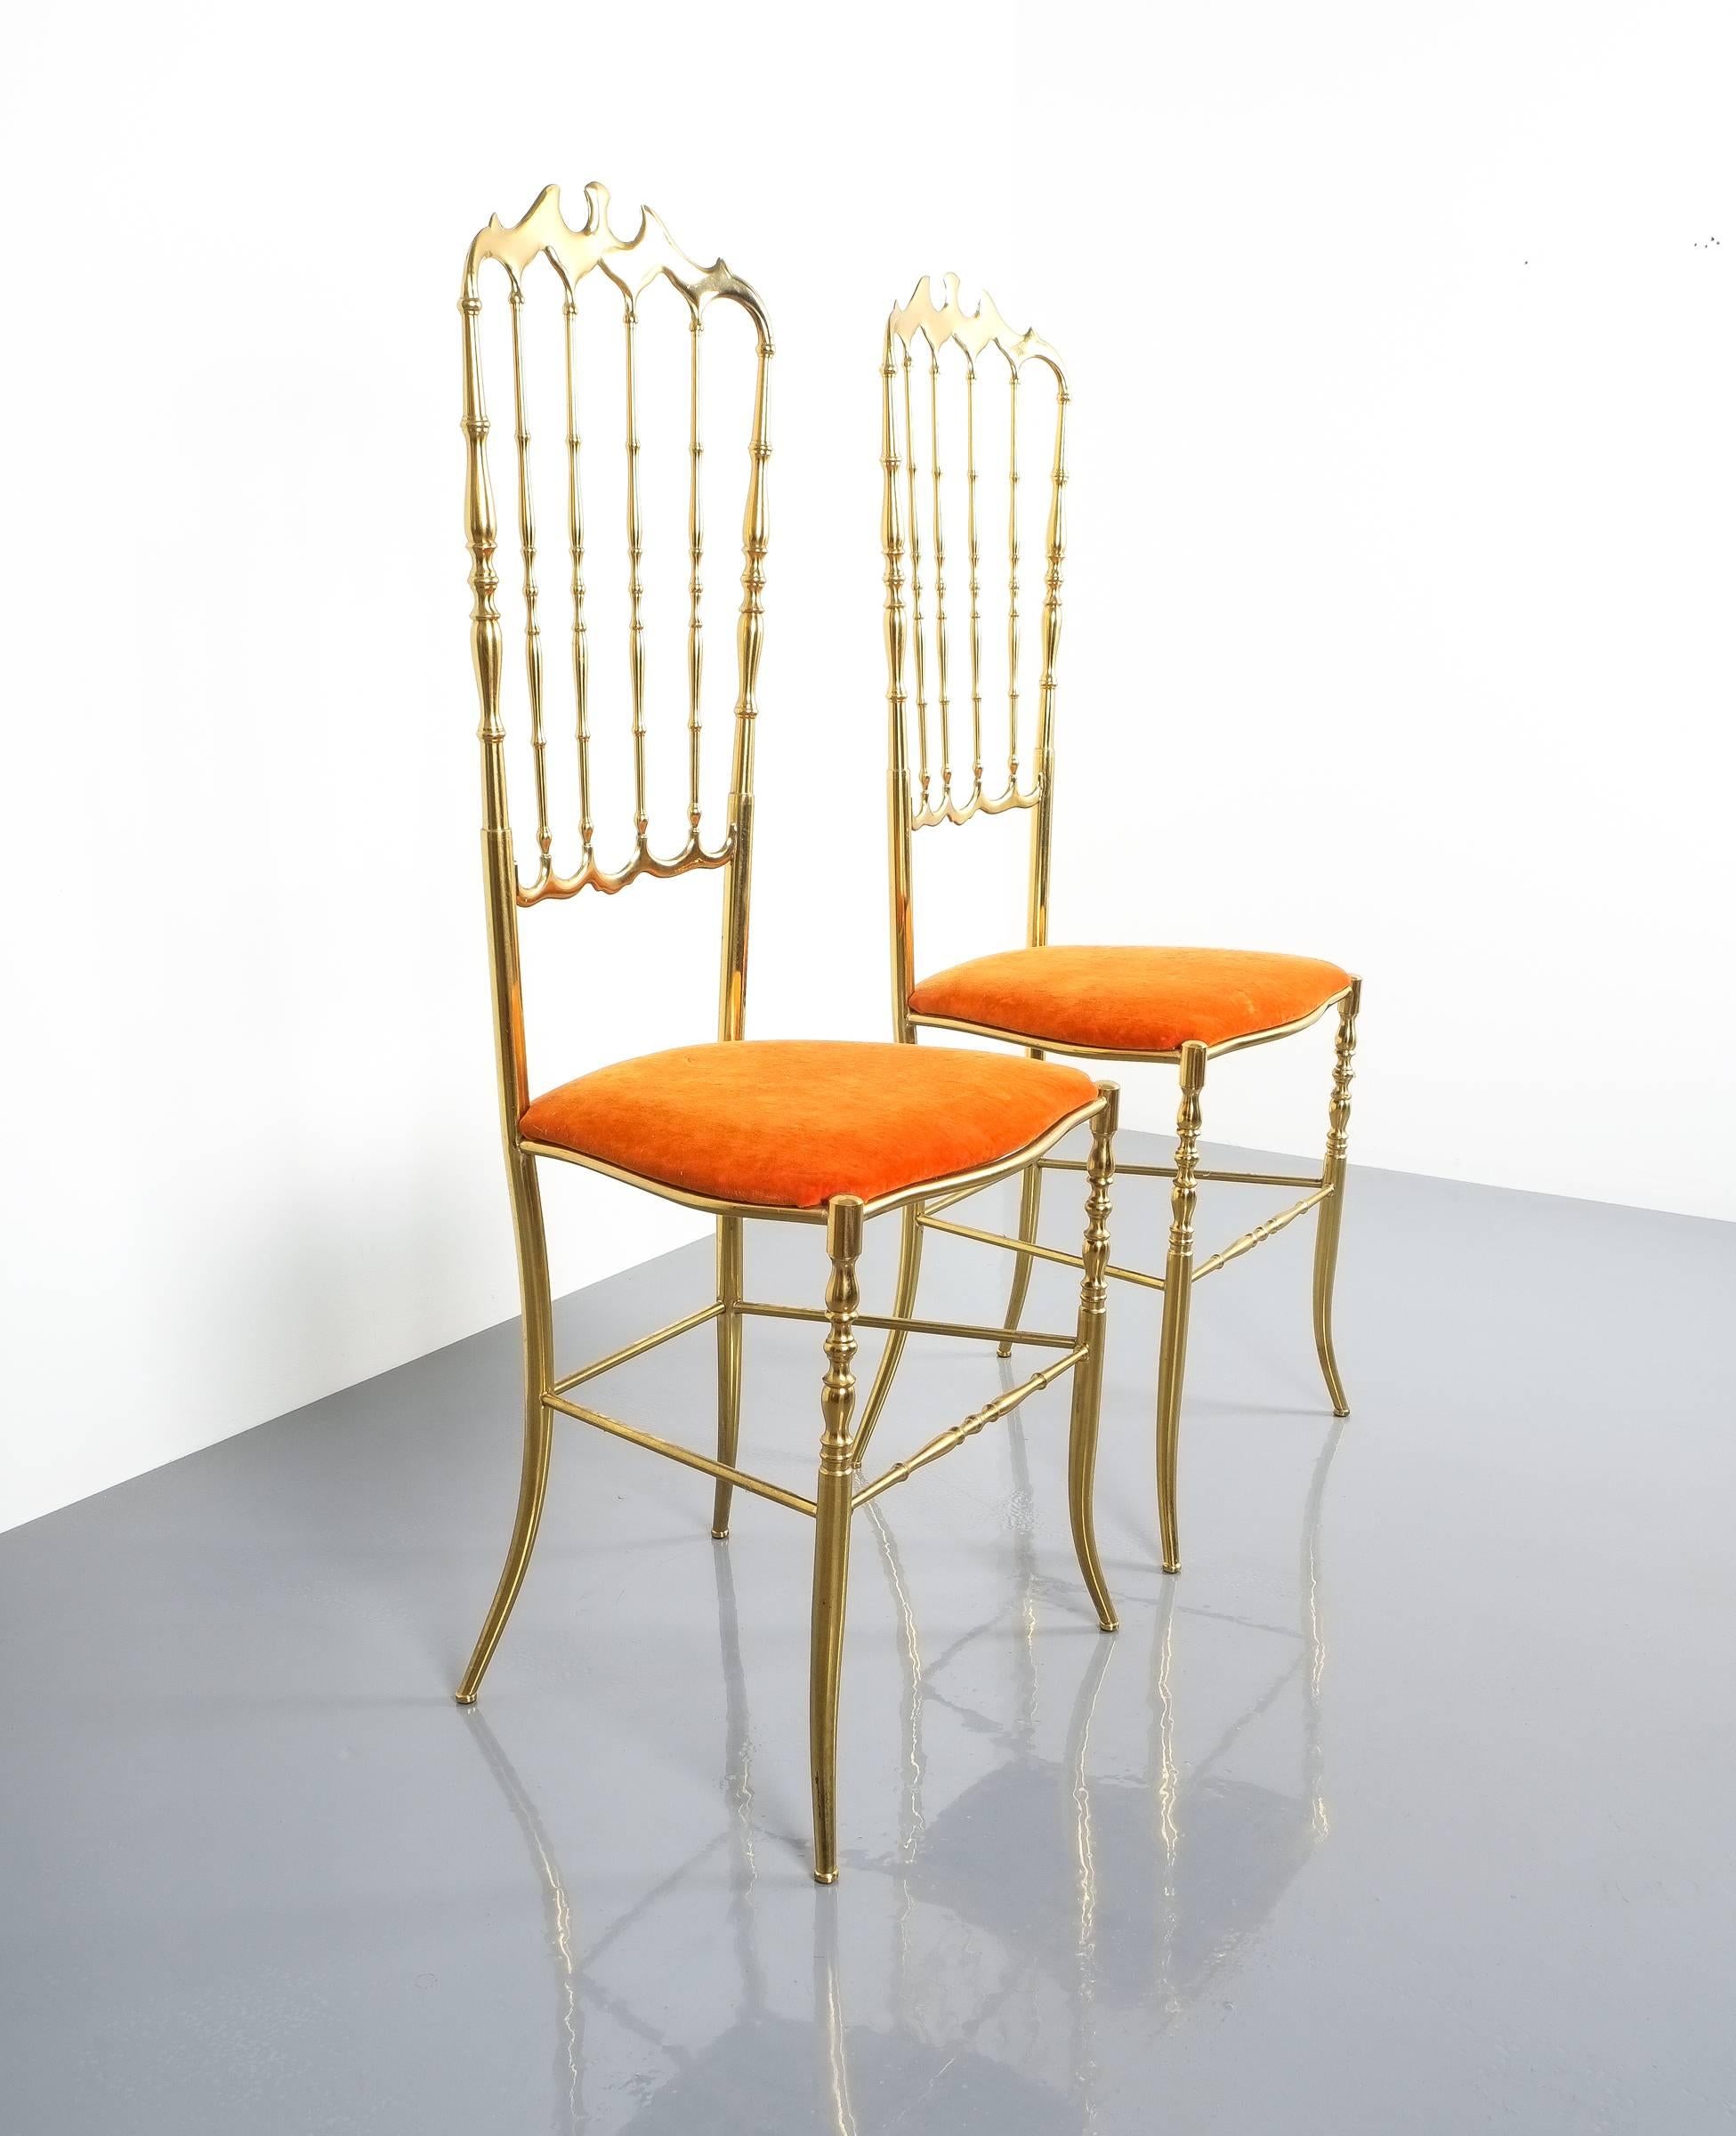 Mid-20th Century Pair of Polished High Back Brass Chairs by Chiavari, Italy, 1950